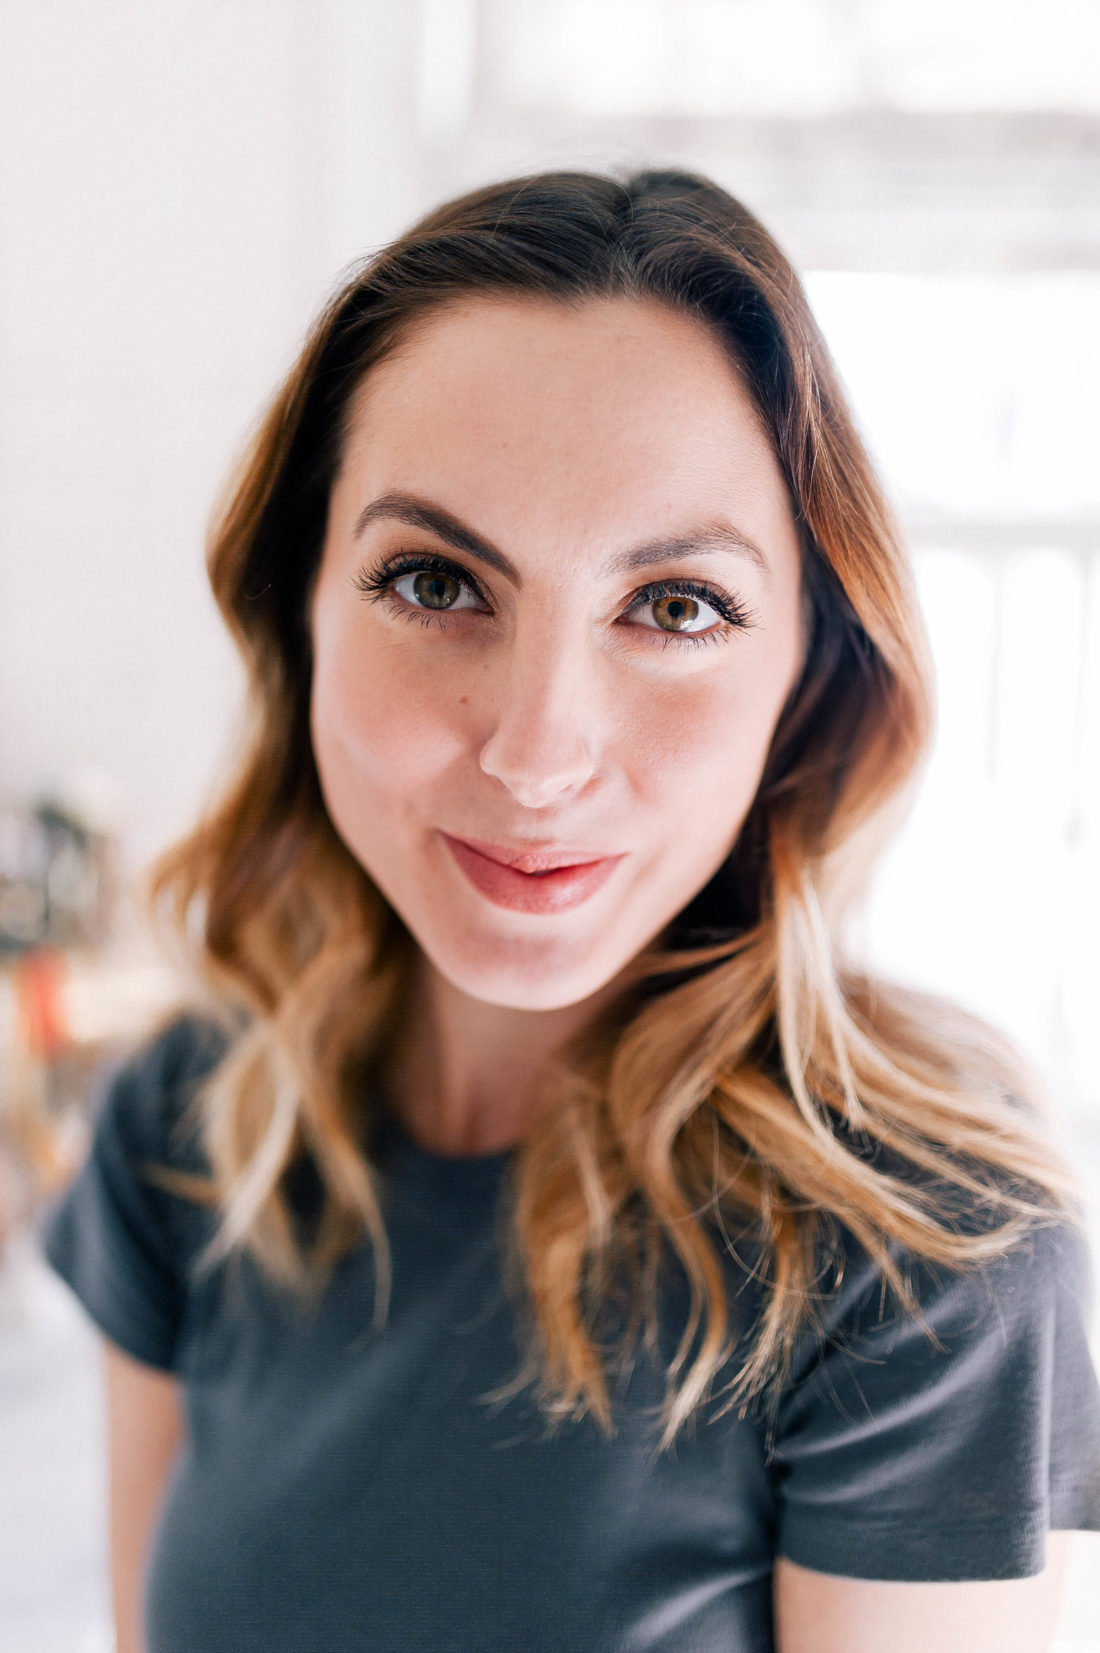 Eva Amurri Martino shows the difference between her eyebrows when one is done and the other isn't